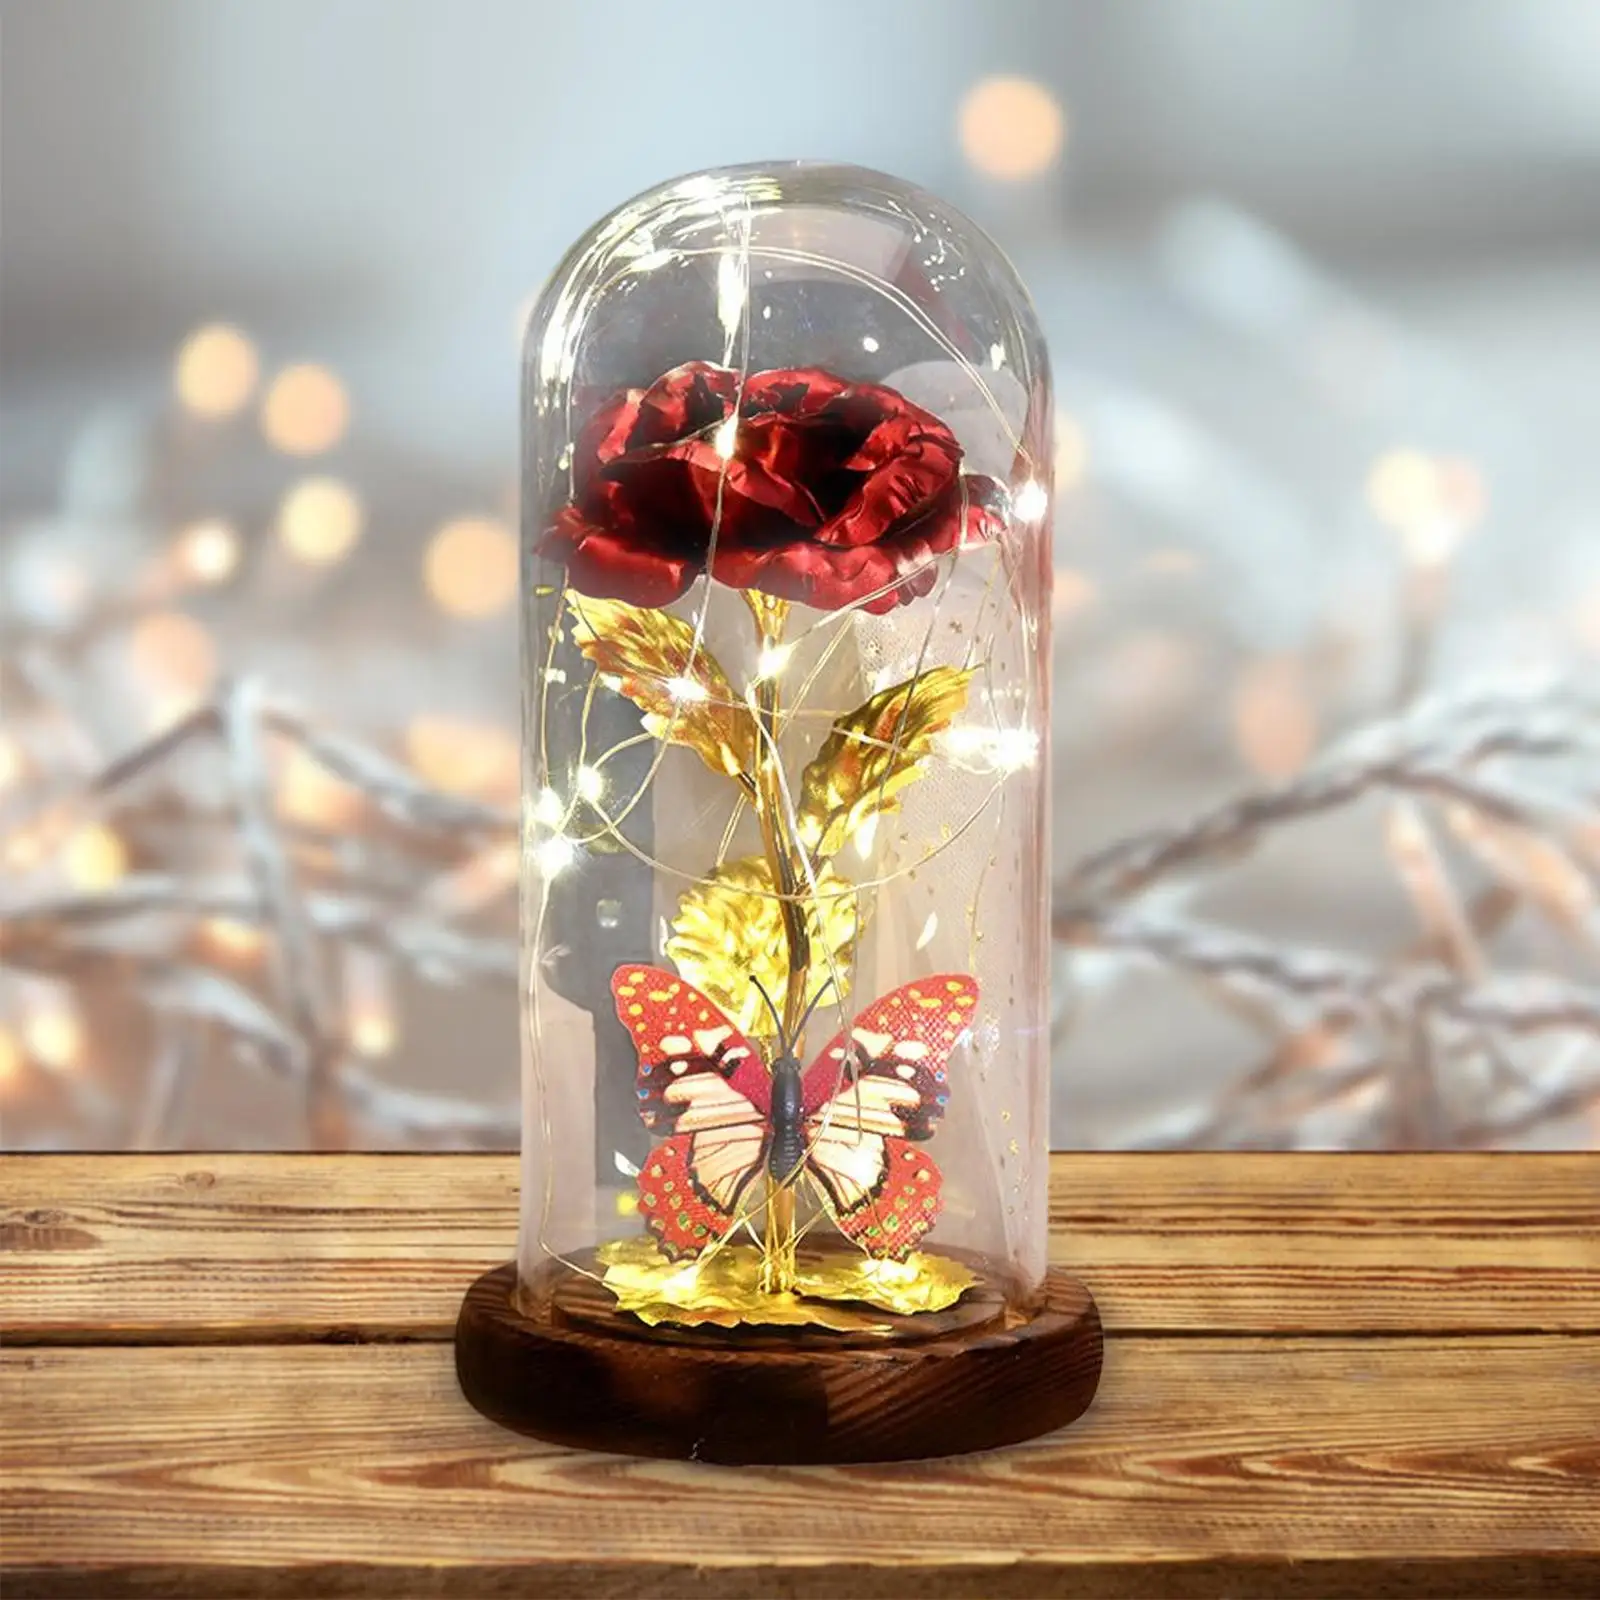 Butterfly Rose Flower Ornaments Bedside Lamp Crafts Glass Cover Creative LED Light for Desktop Fireplace Party Gift Home Decor